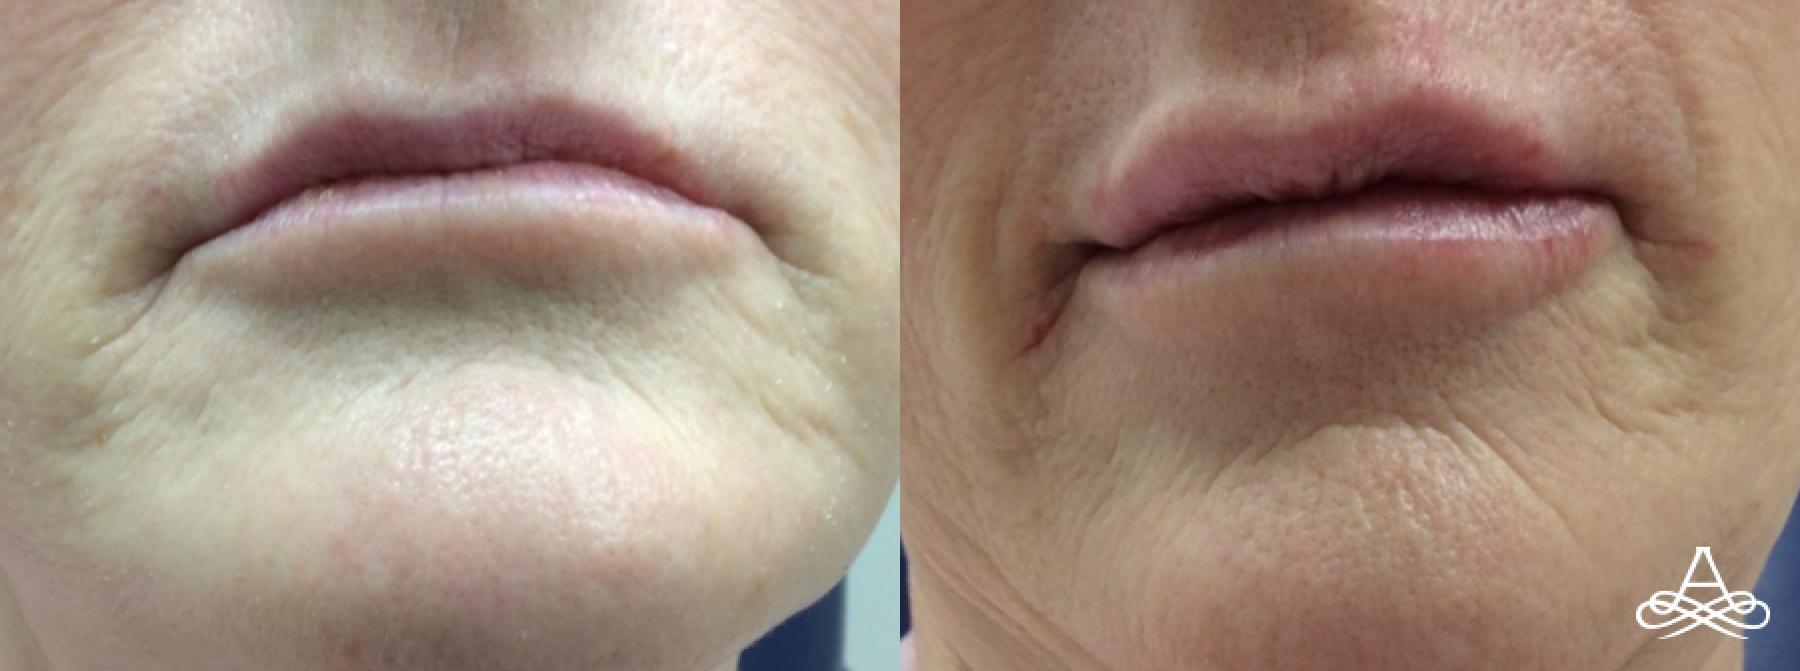 Lip Filler: Patient 10 - Before and After  